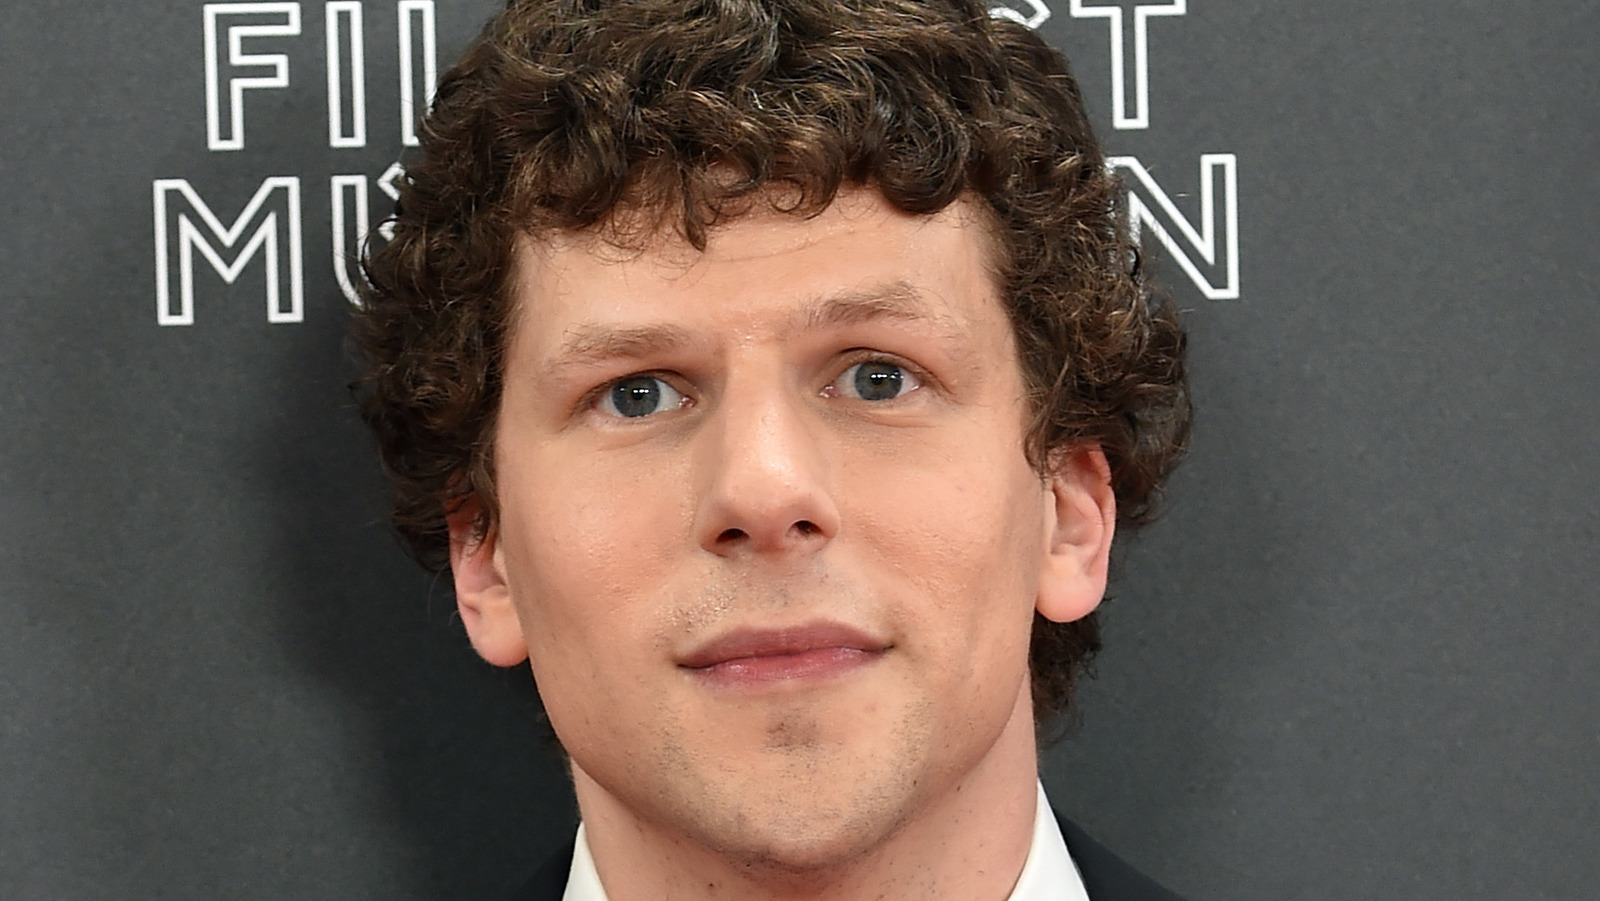 The Forgotten Jesse Eisenberg Interview That's Hard To Watch Now